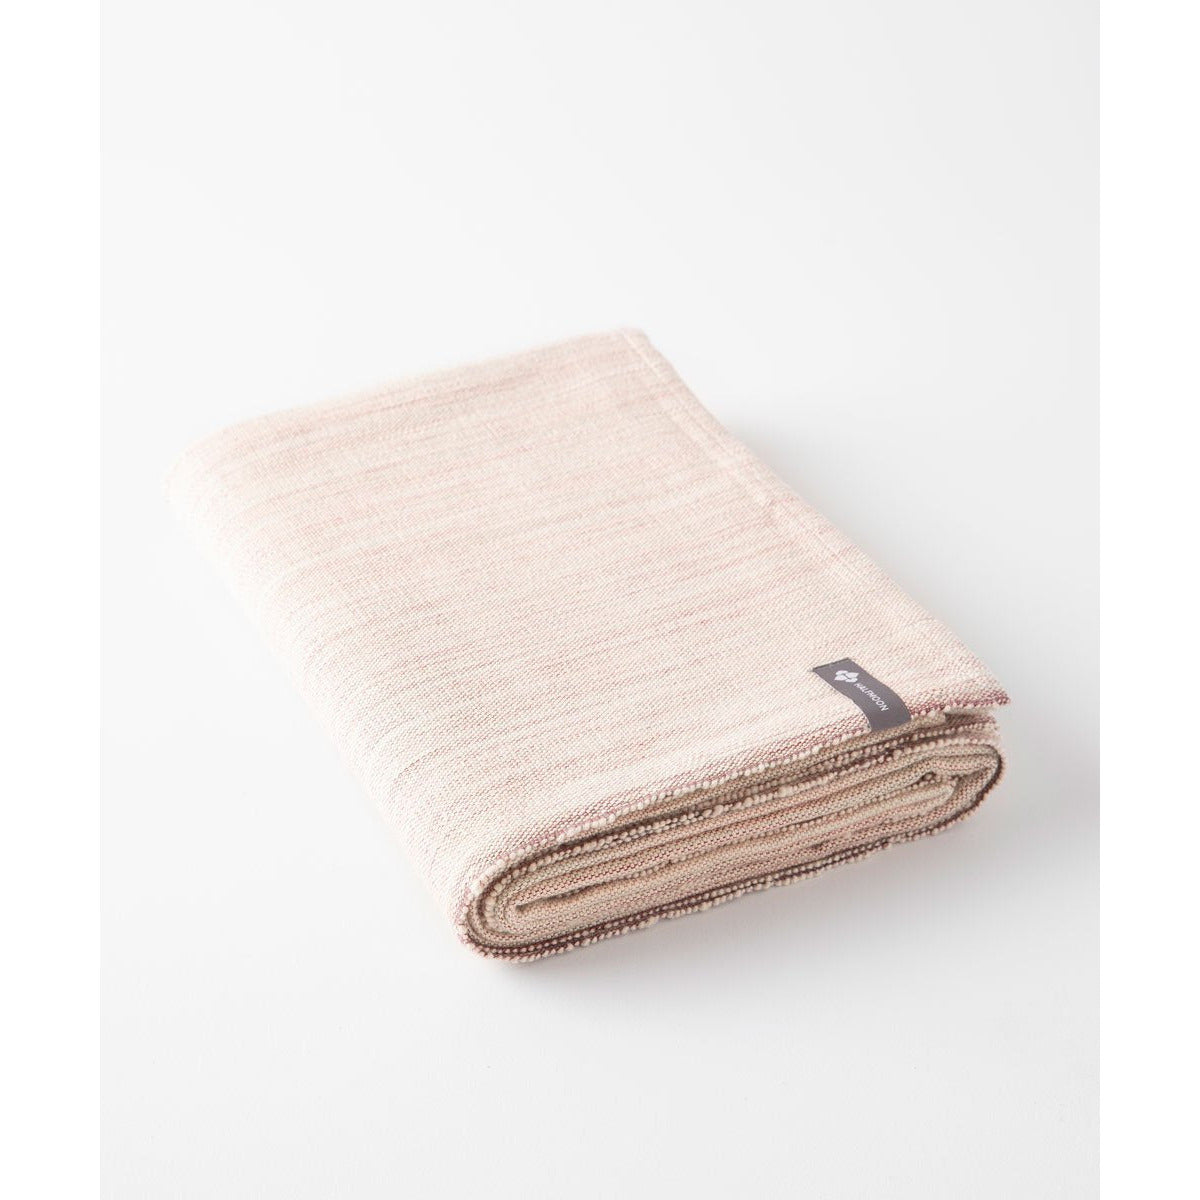 Wide Selection of Yoga Blankets, AUM – Aum